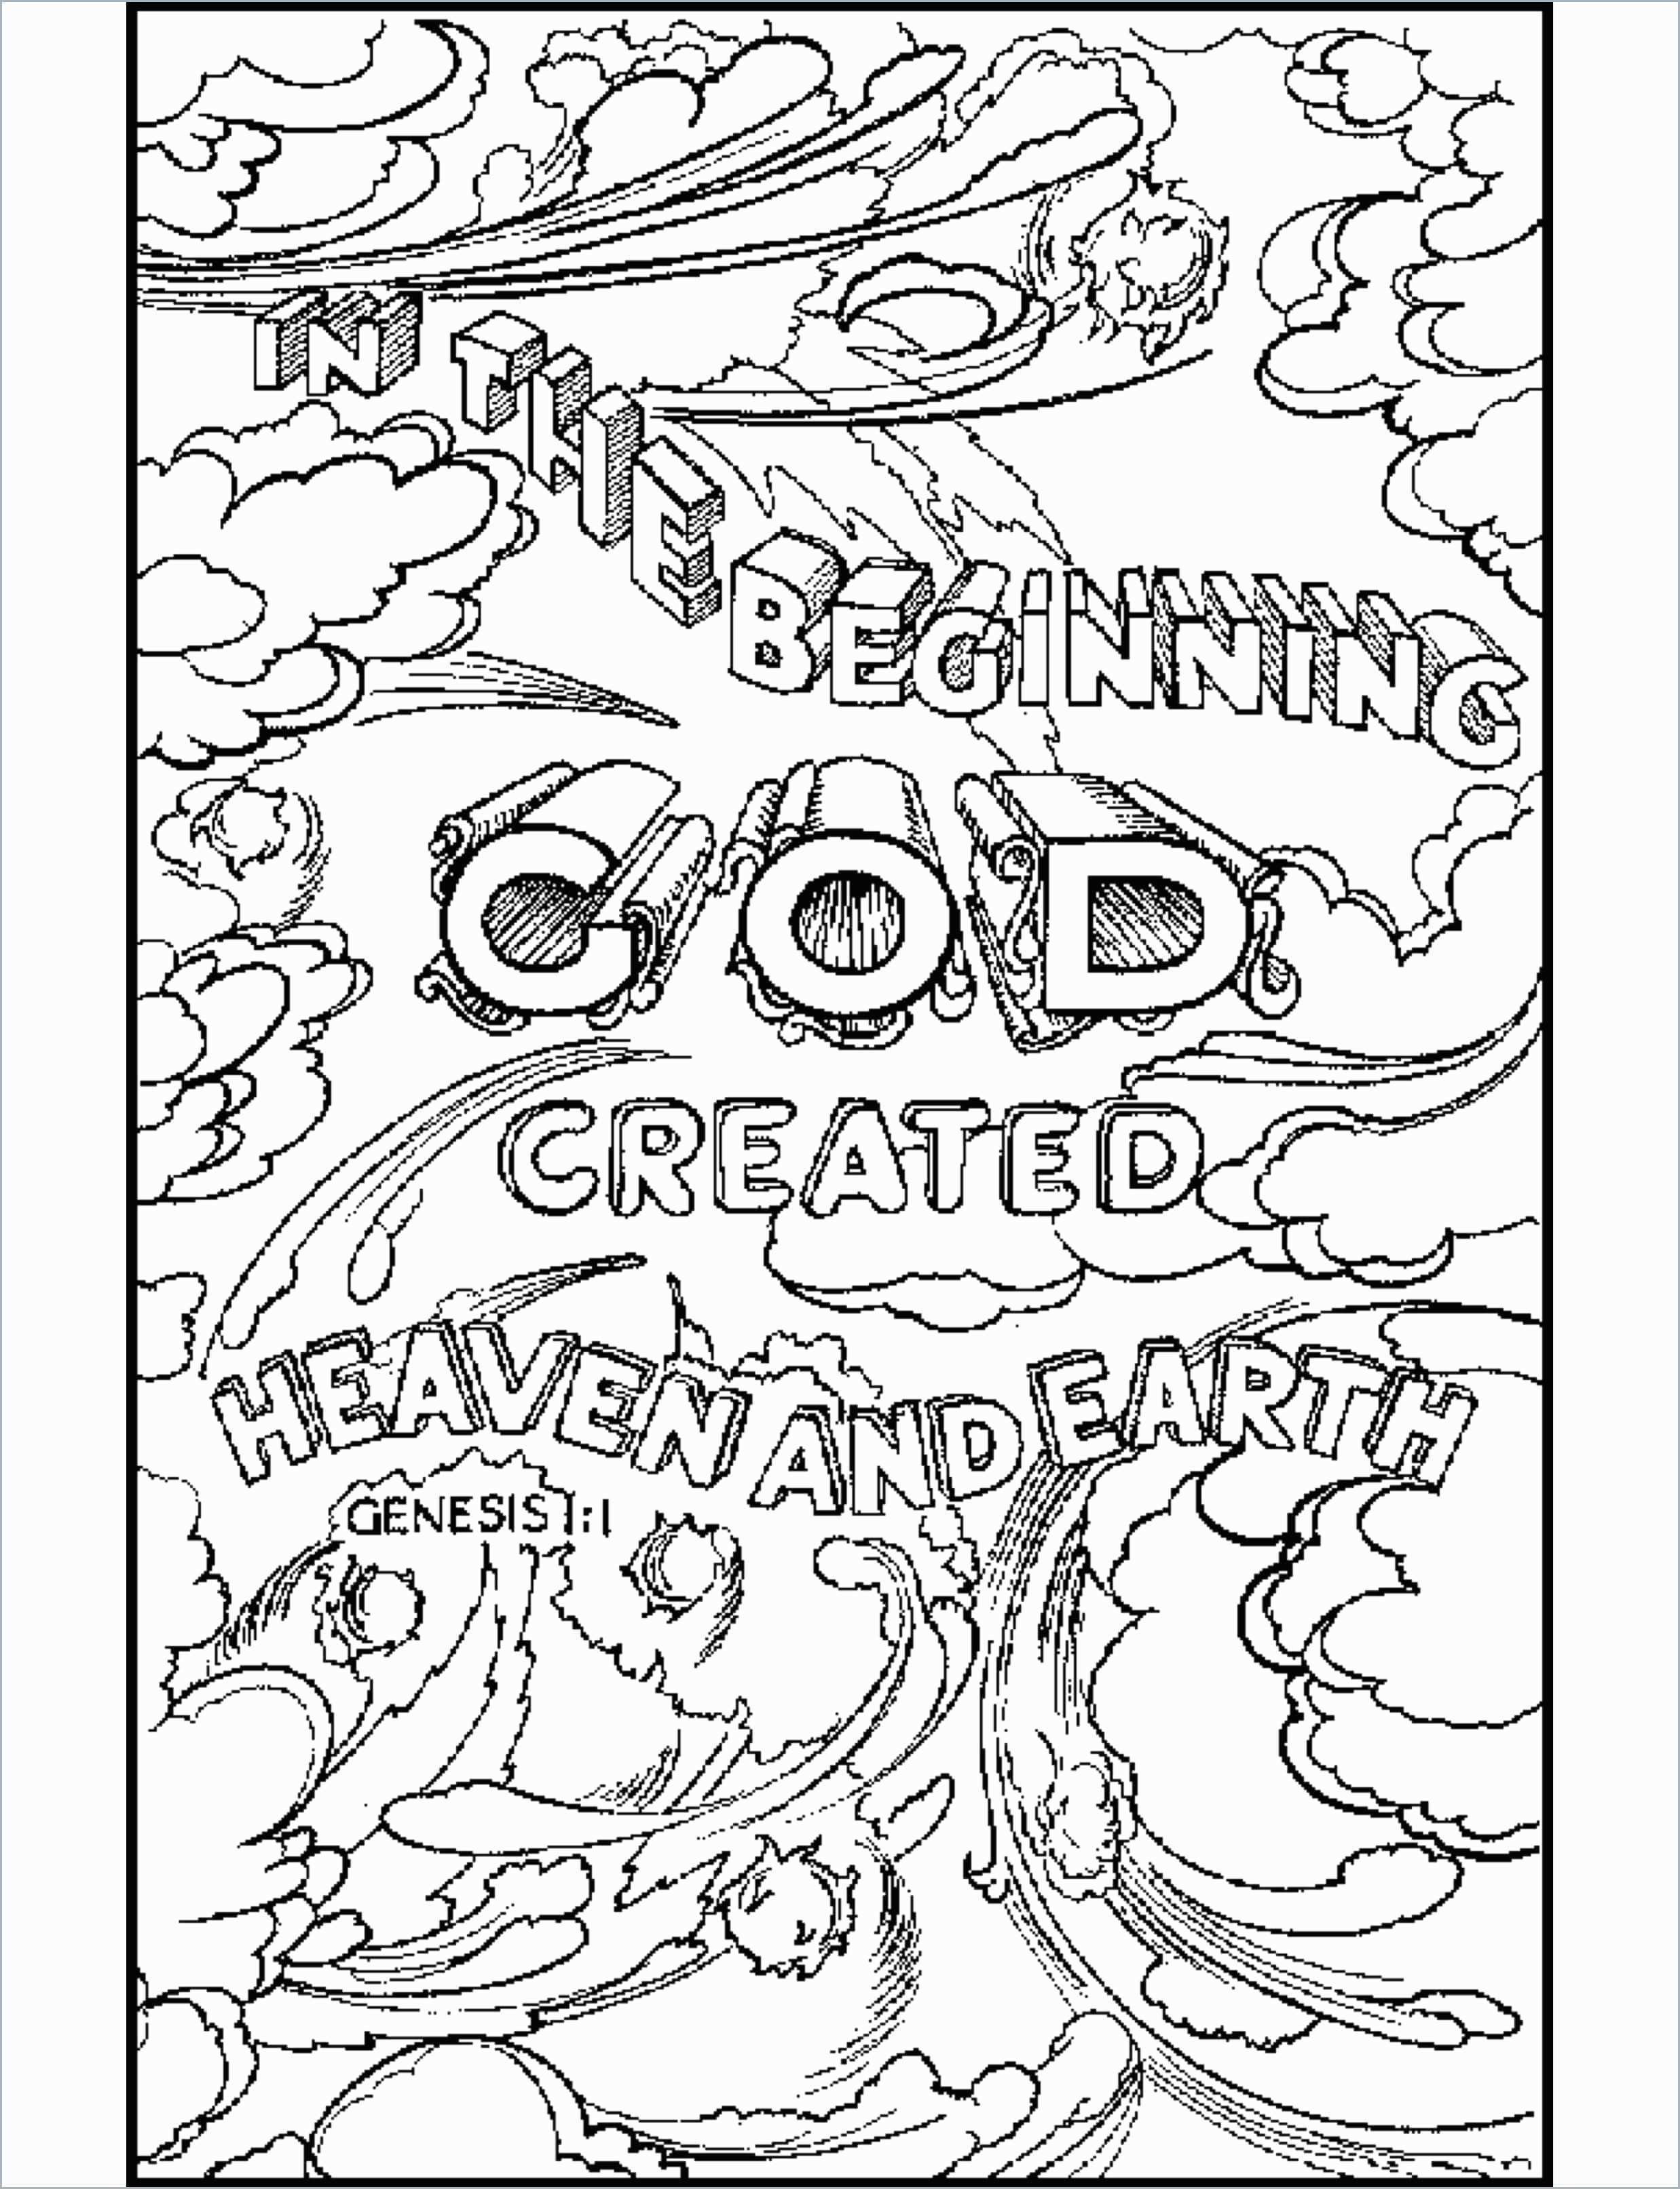 Coloring Pages : Free Printable Bible Coloring Pages With Scriptures - Free Printable Bible Coloring Pages With Scriptures